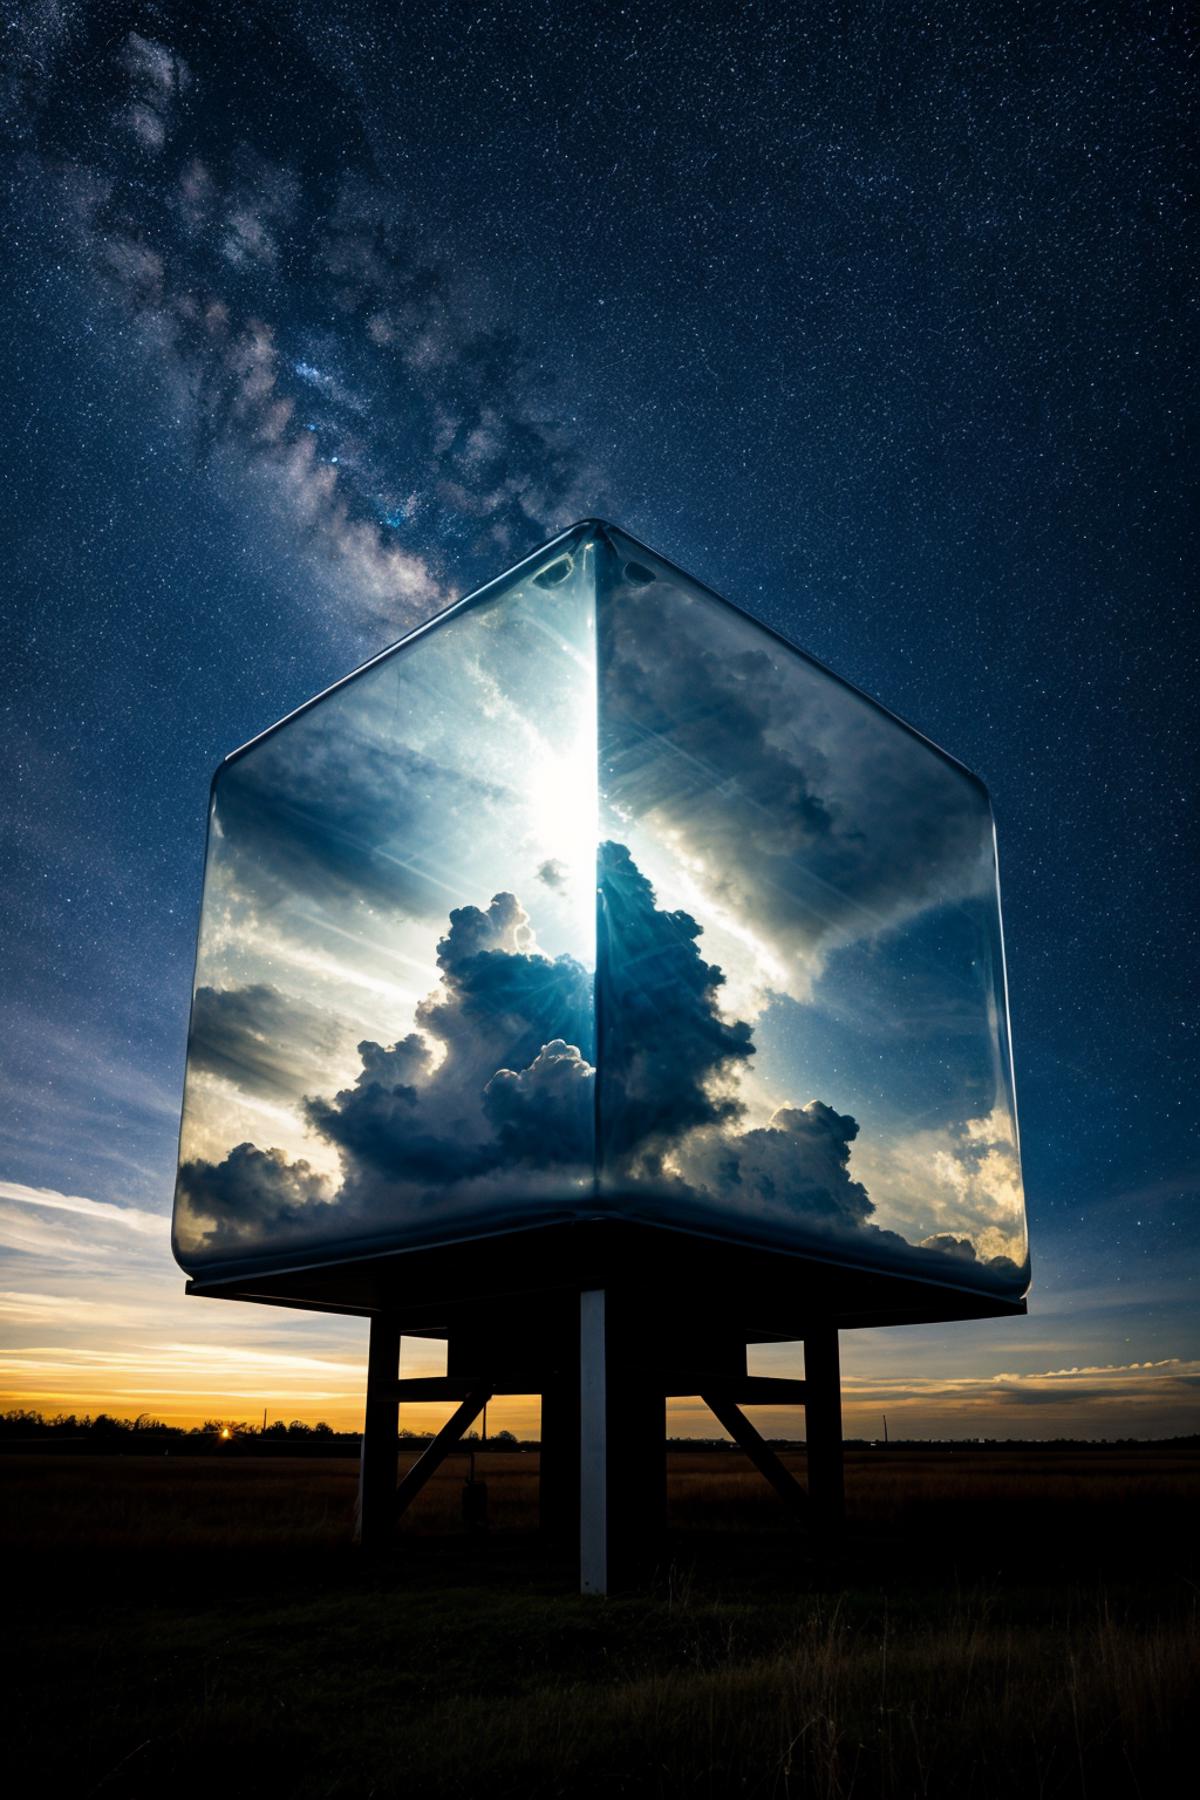 A Glowing Cloud in a Large Glass Container at Sunset